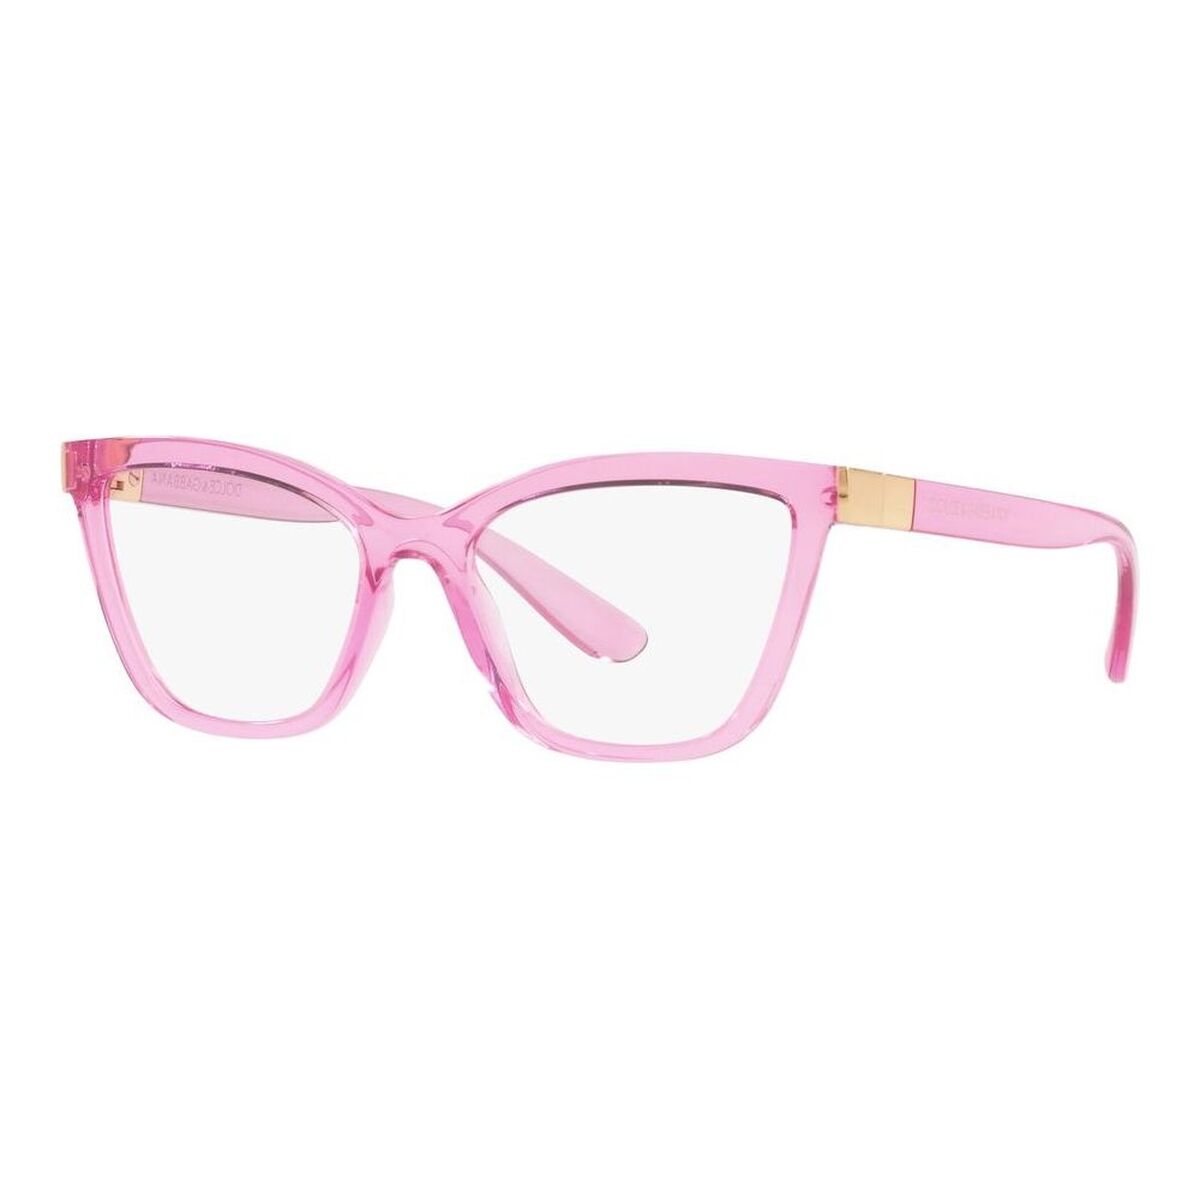 Dolce & Gabbana Ladies' Spectacle Frame  Dg 5076 Gbby2 In Pink